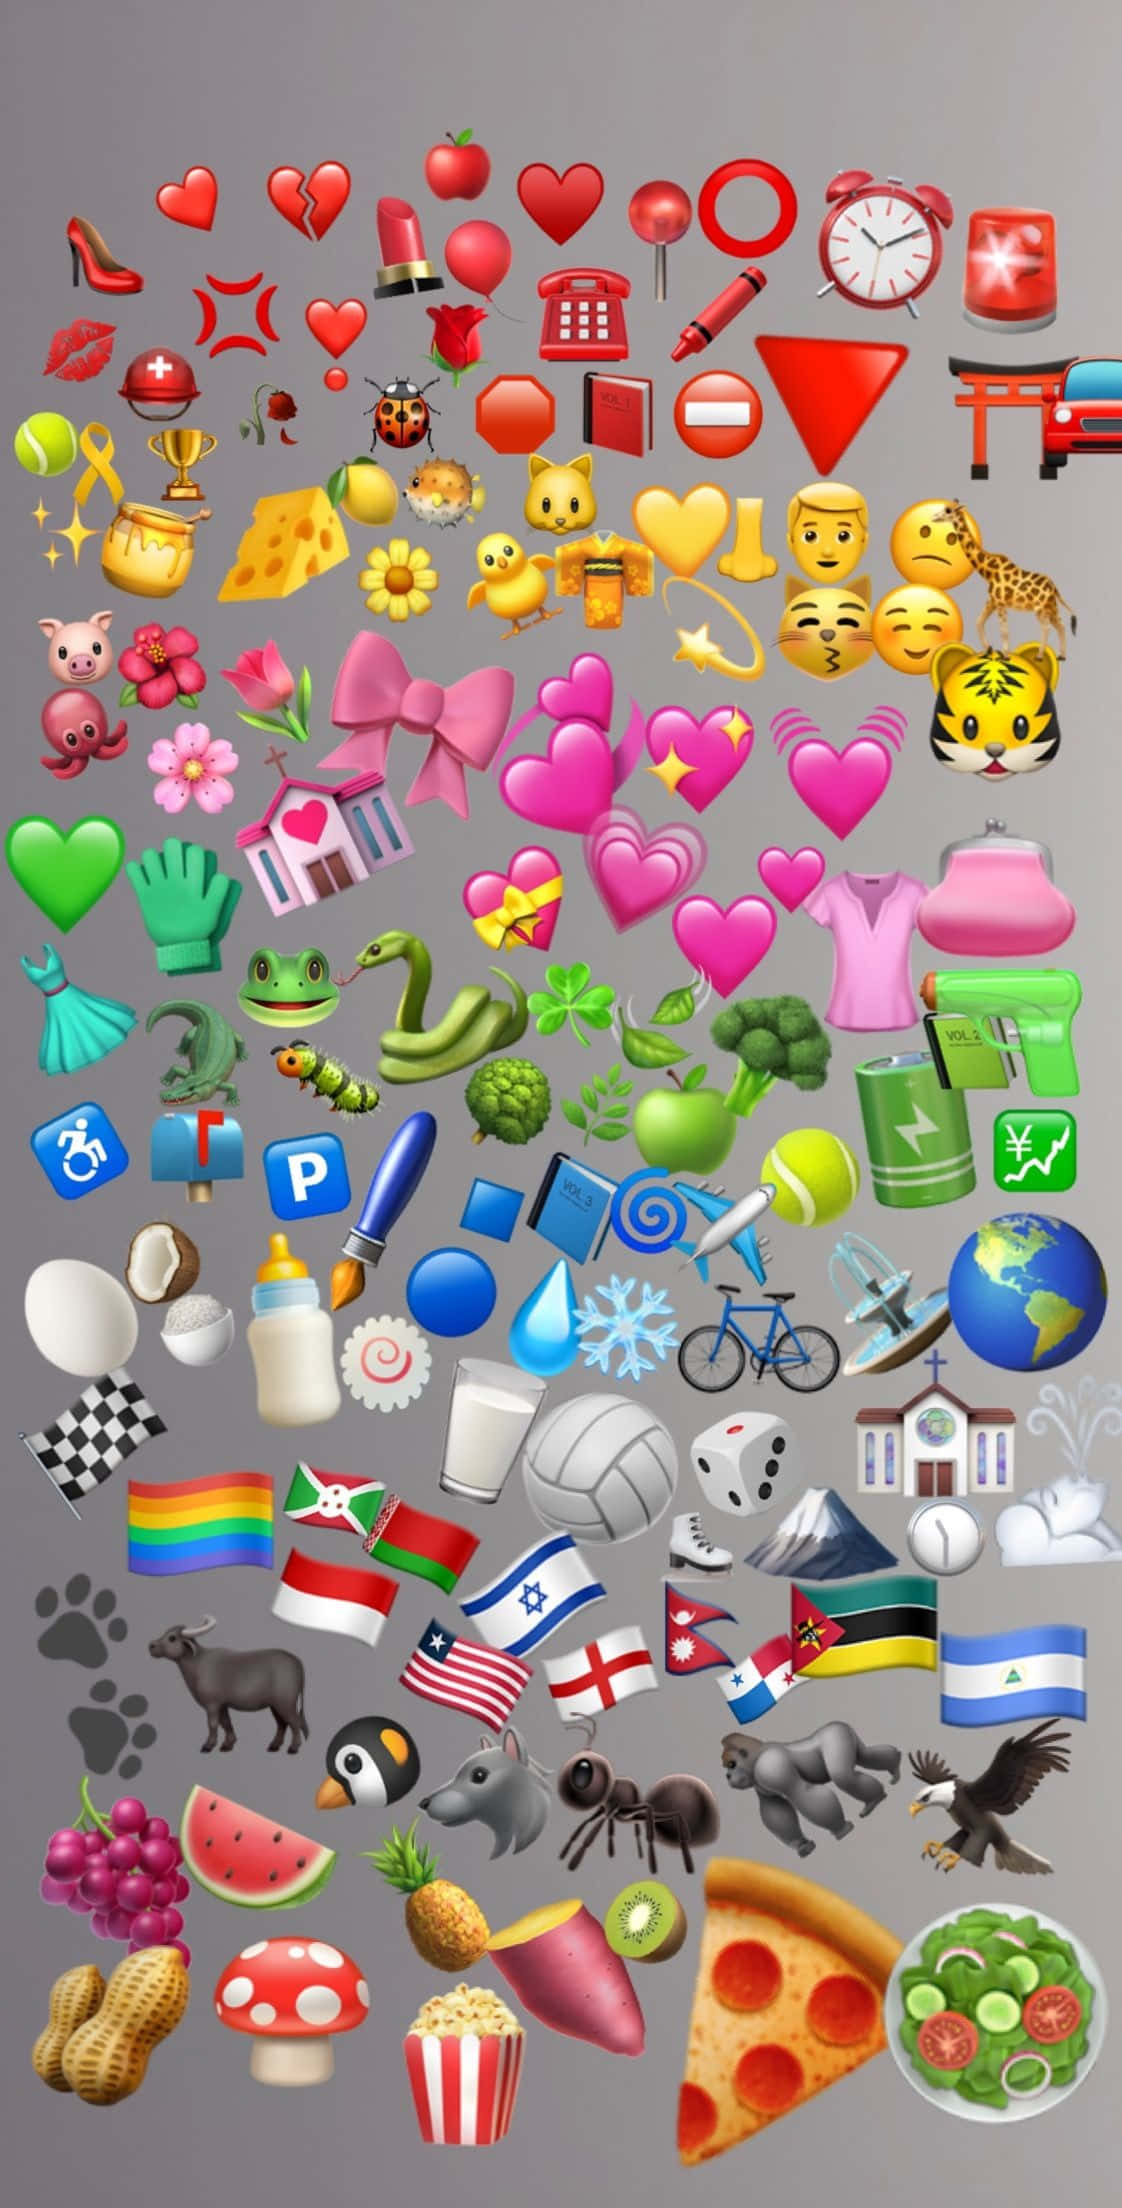 Send a Message in Style with Animoji Wallpaper